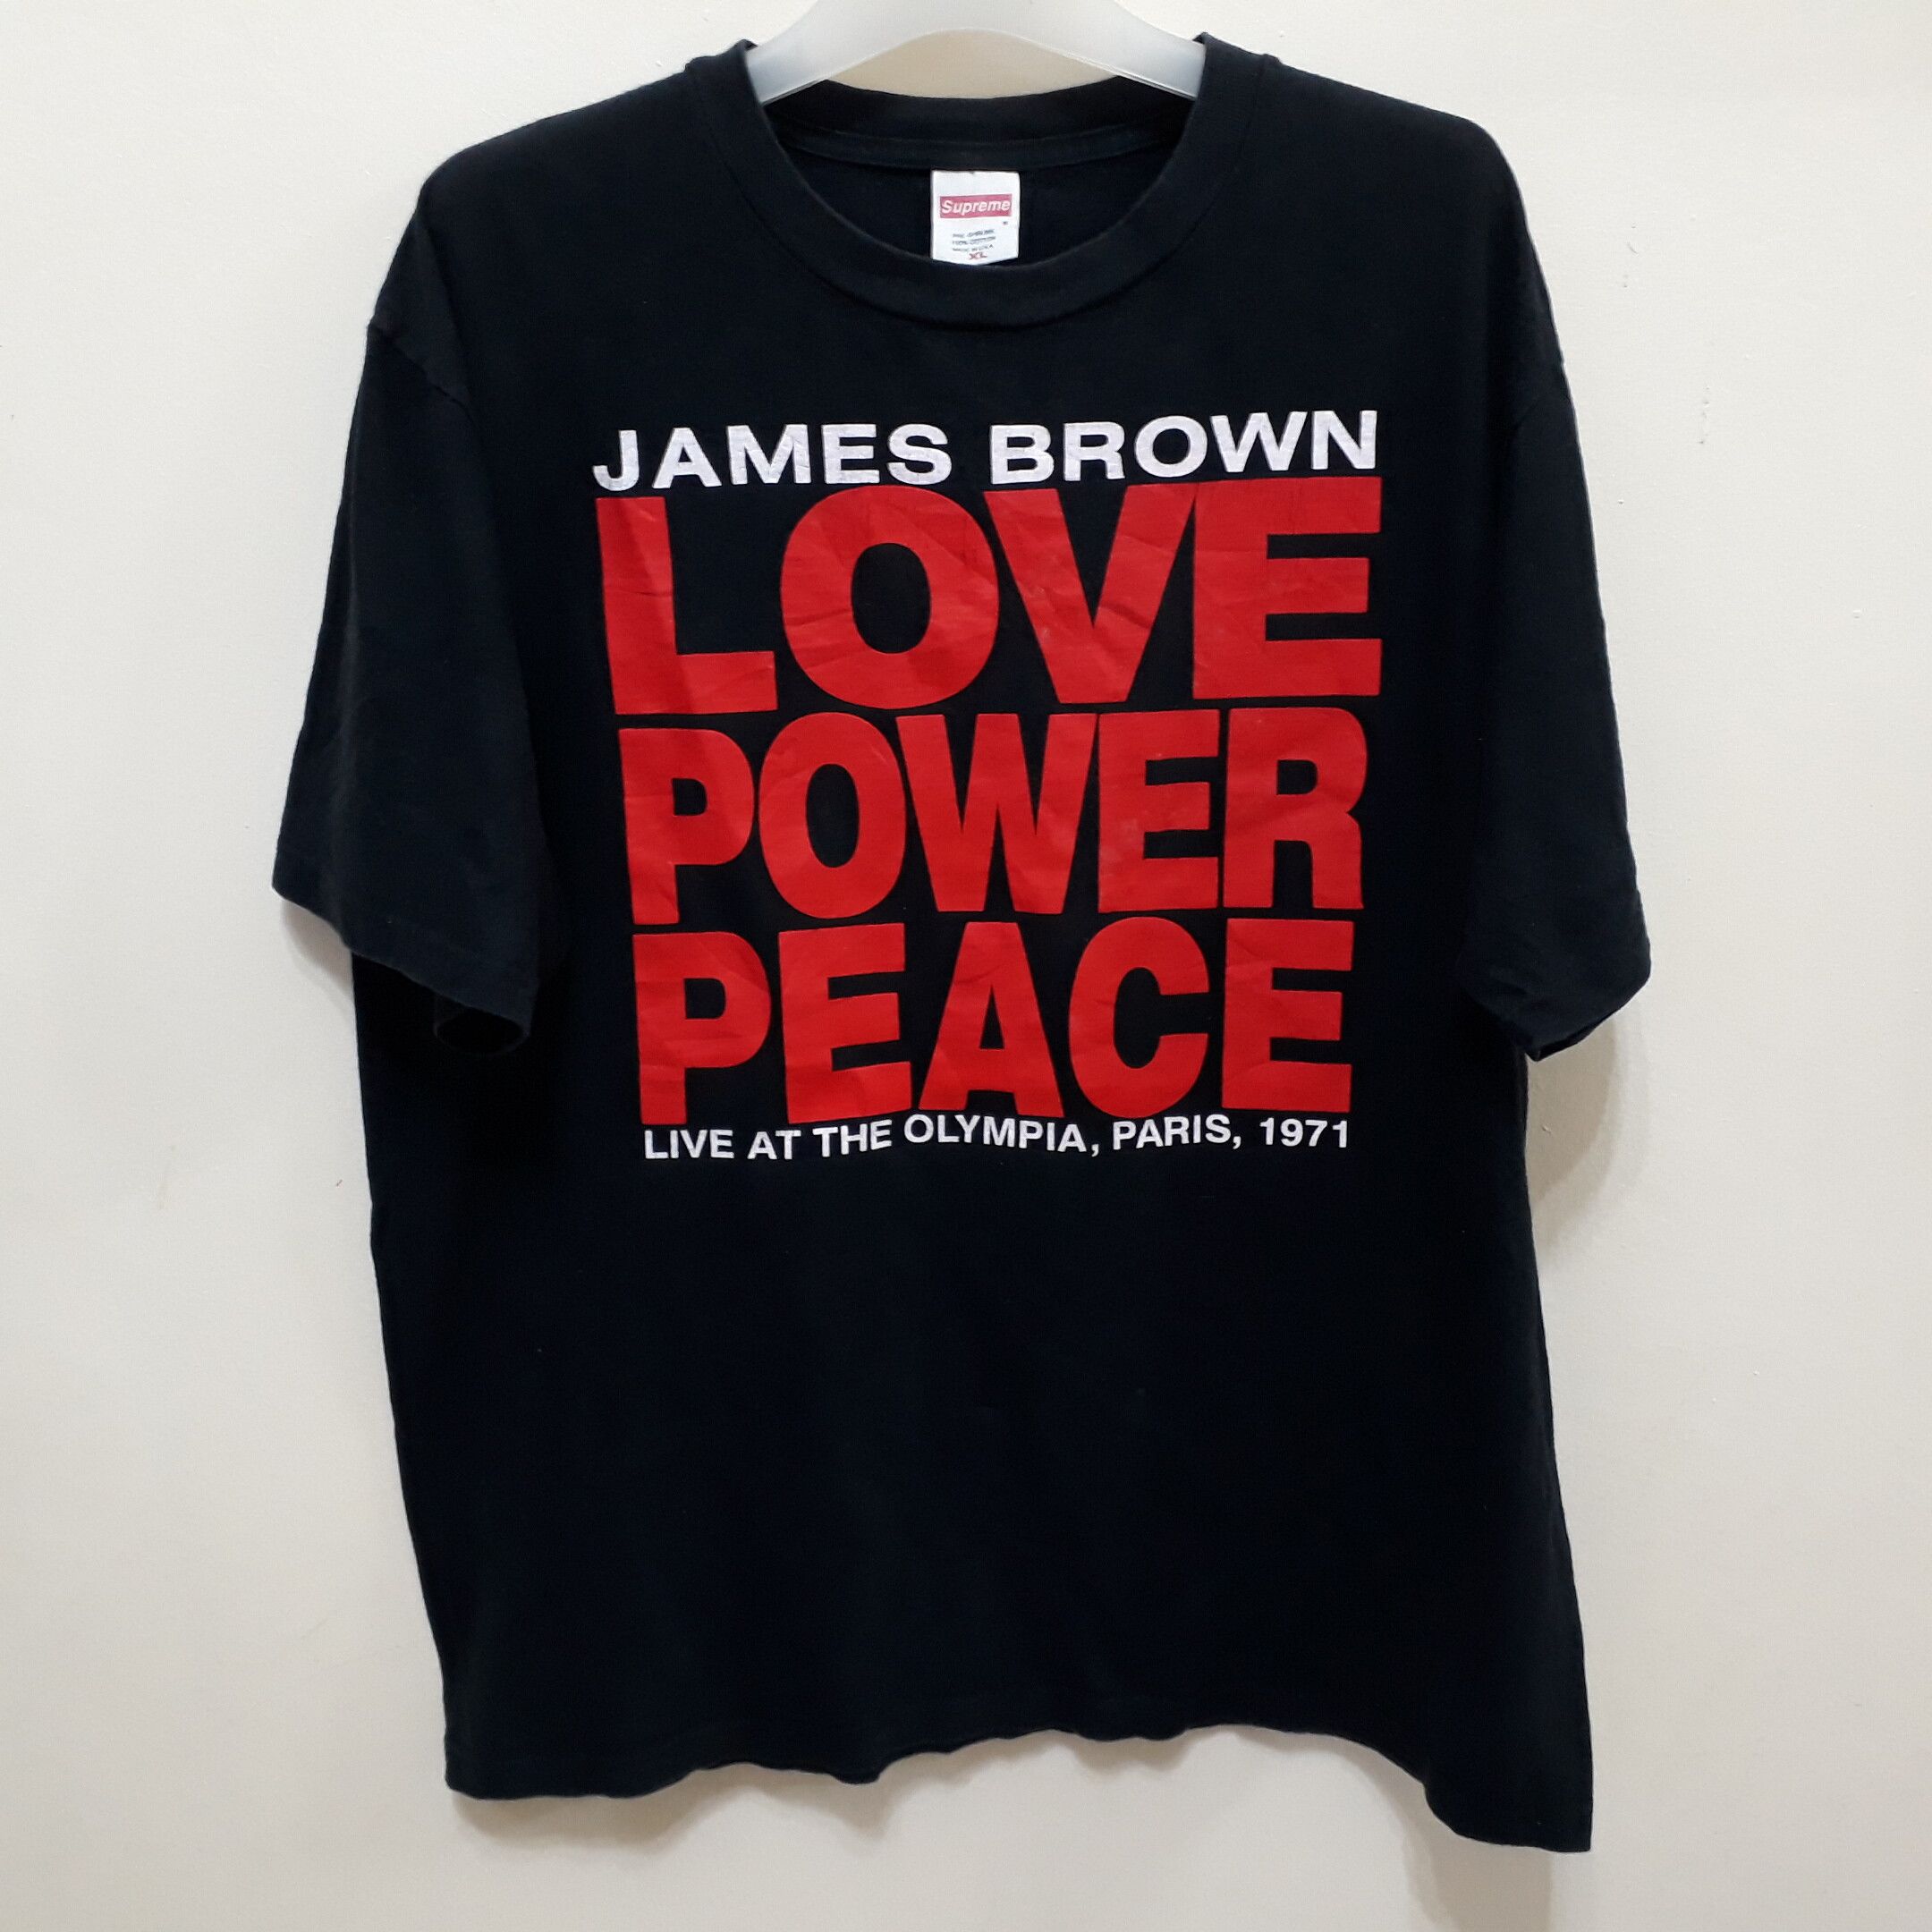 Supreme Supreme x James Brown T Shirt Love Power Peace Live at The